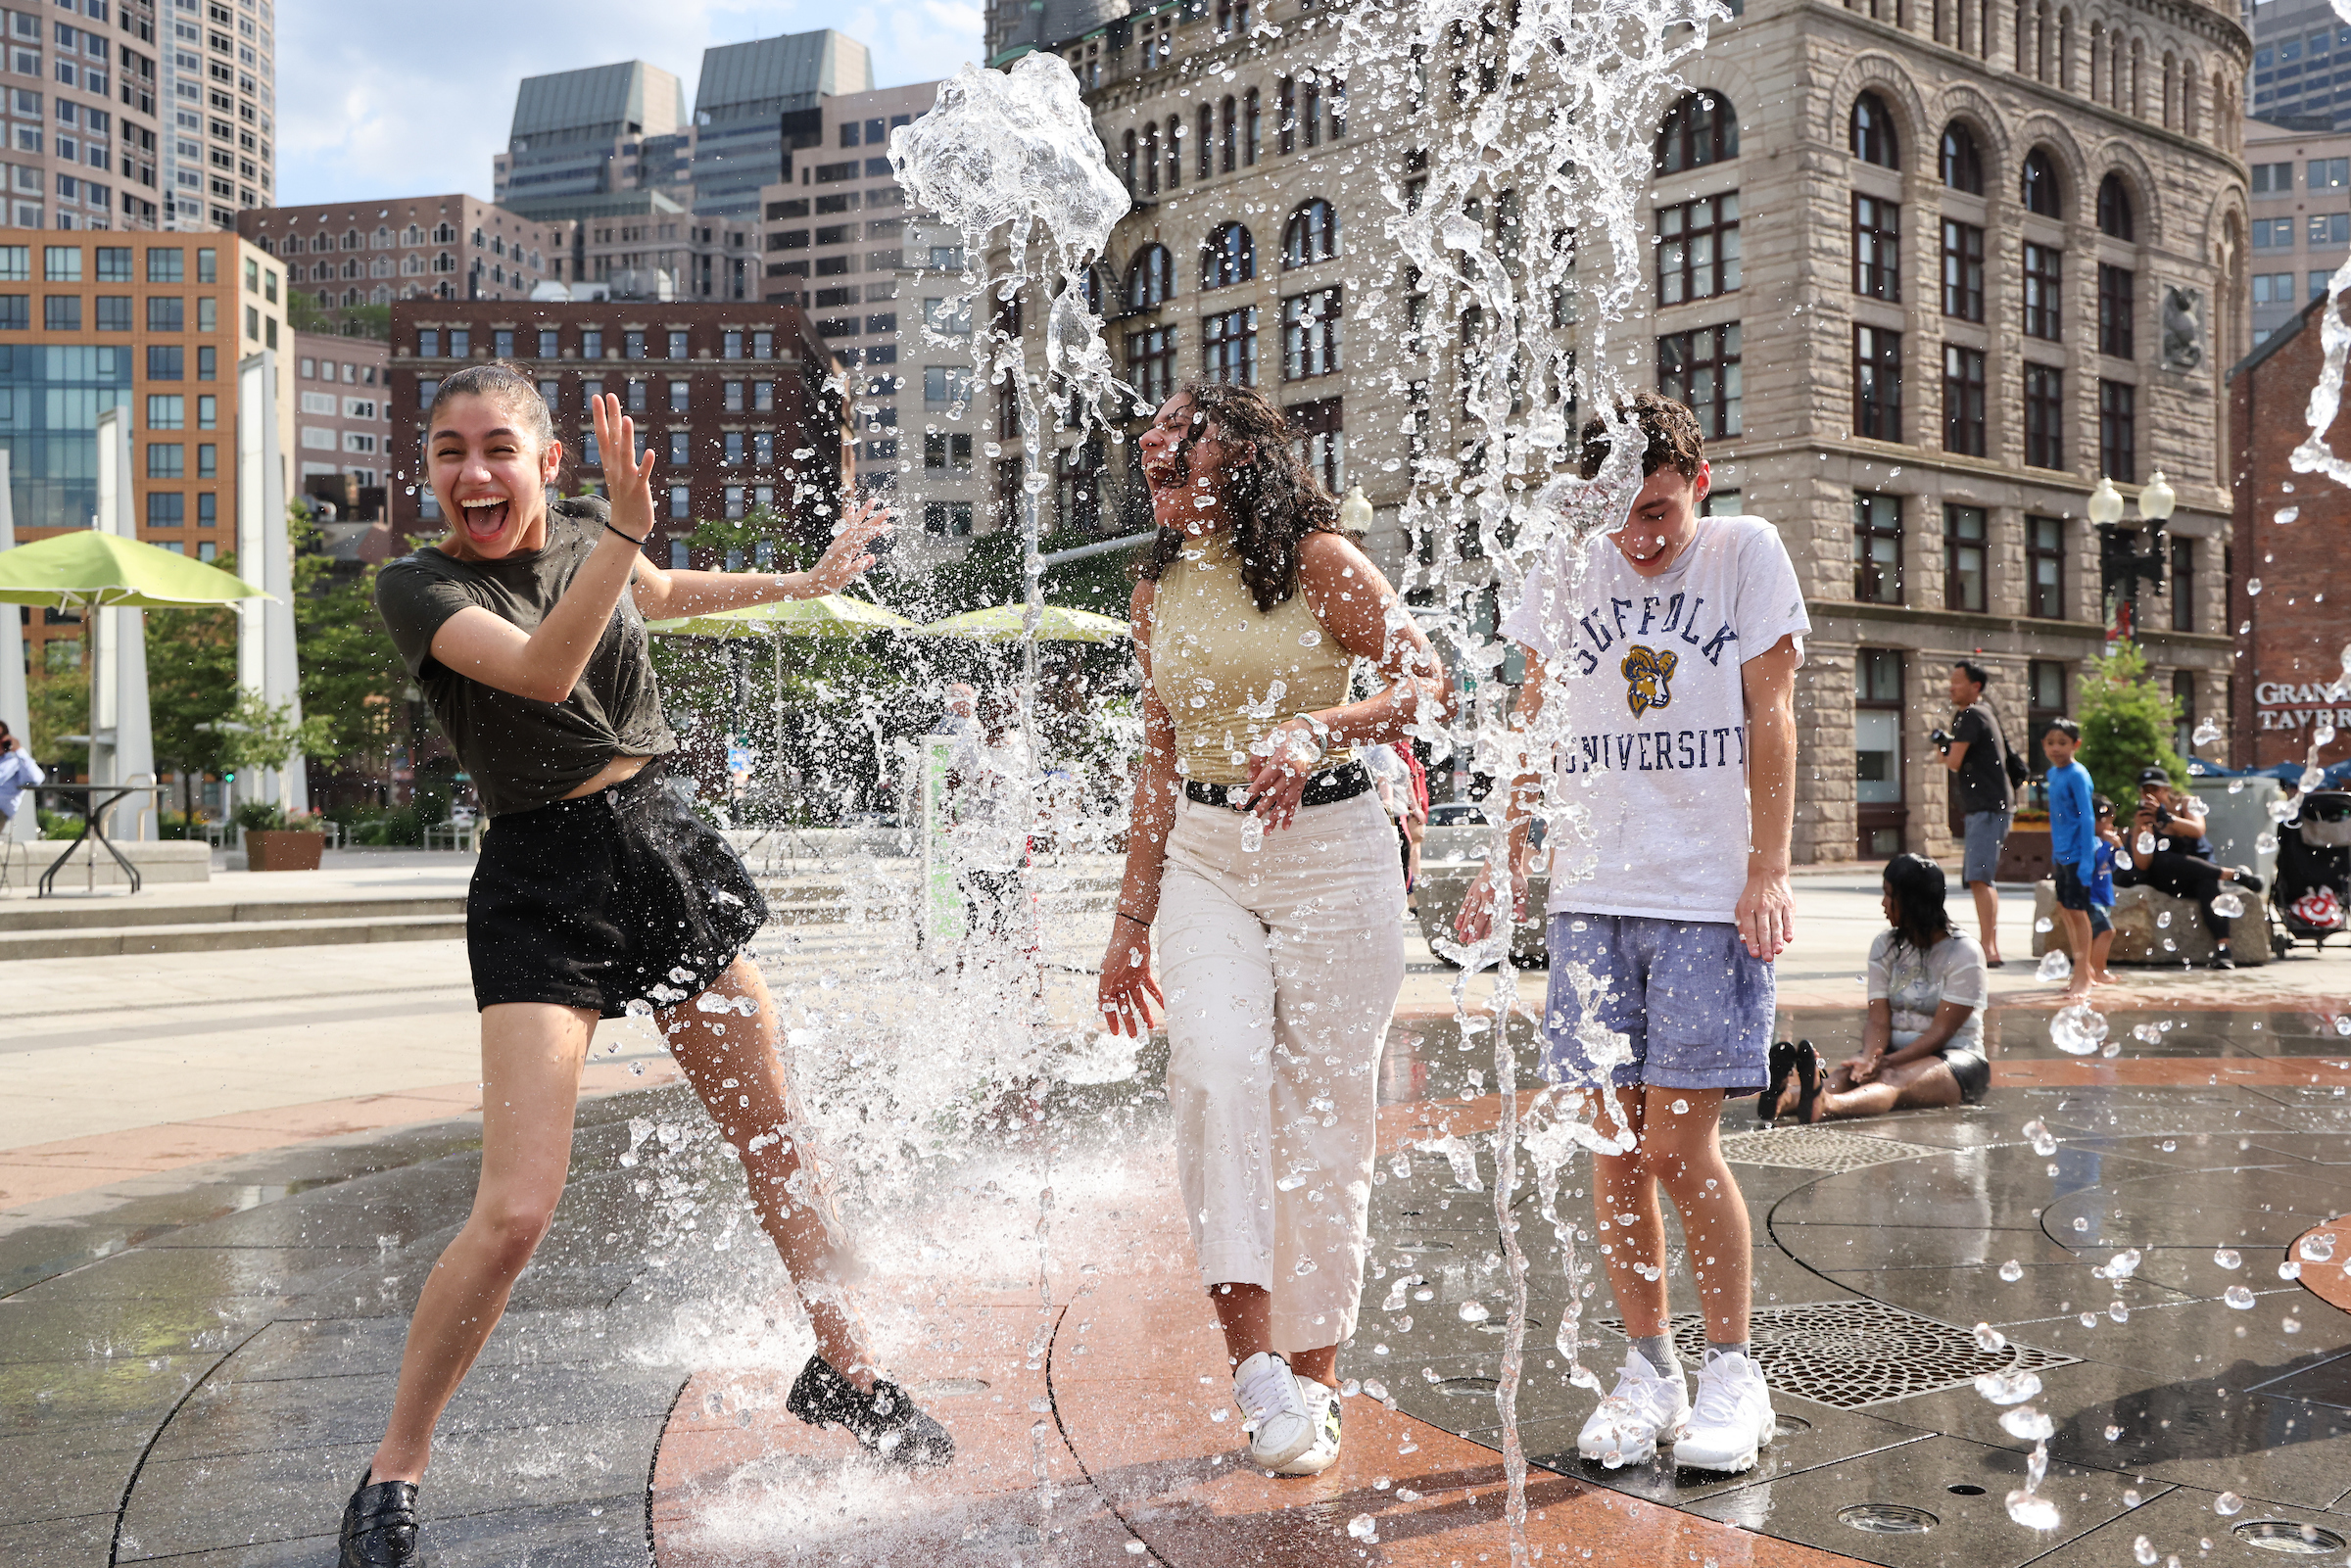 Suffolk undergrads Lucia Vilches, Class of 2024, Yasmine Tebib, Class of 2022, and Logan Gozzi, Class of 2024 enjoy a water fountain on a hot summer day in downtown Boston